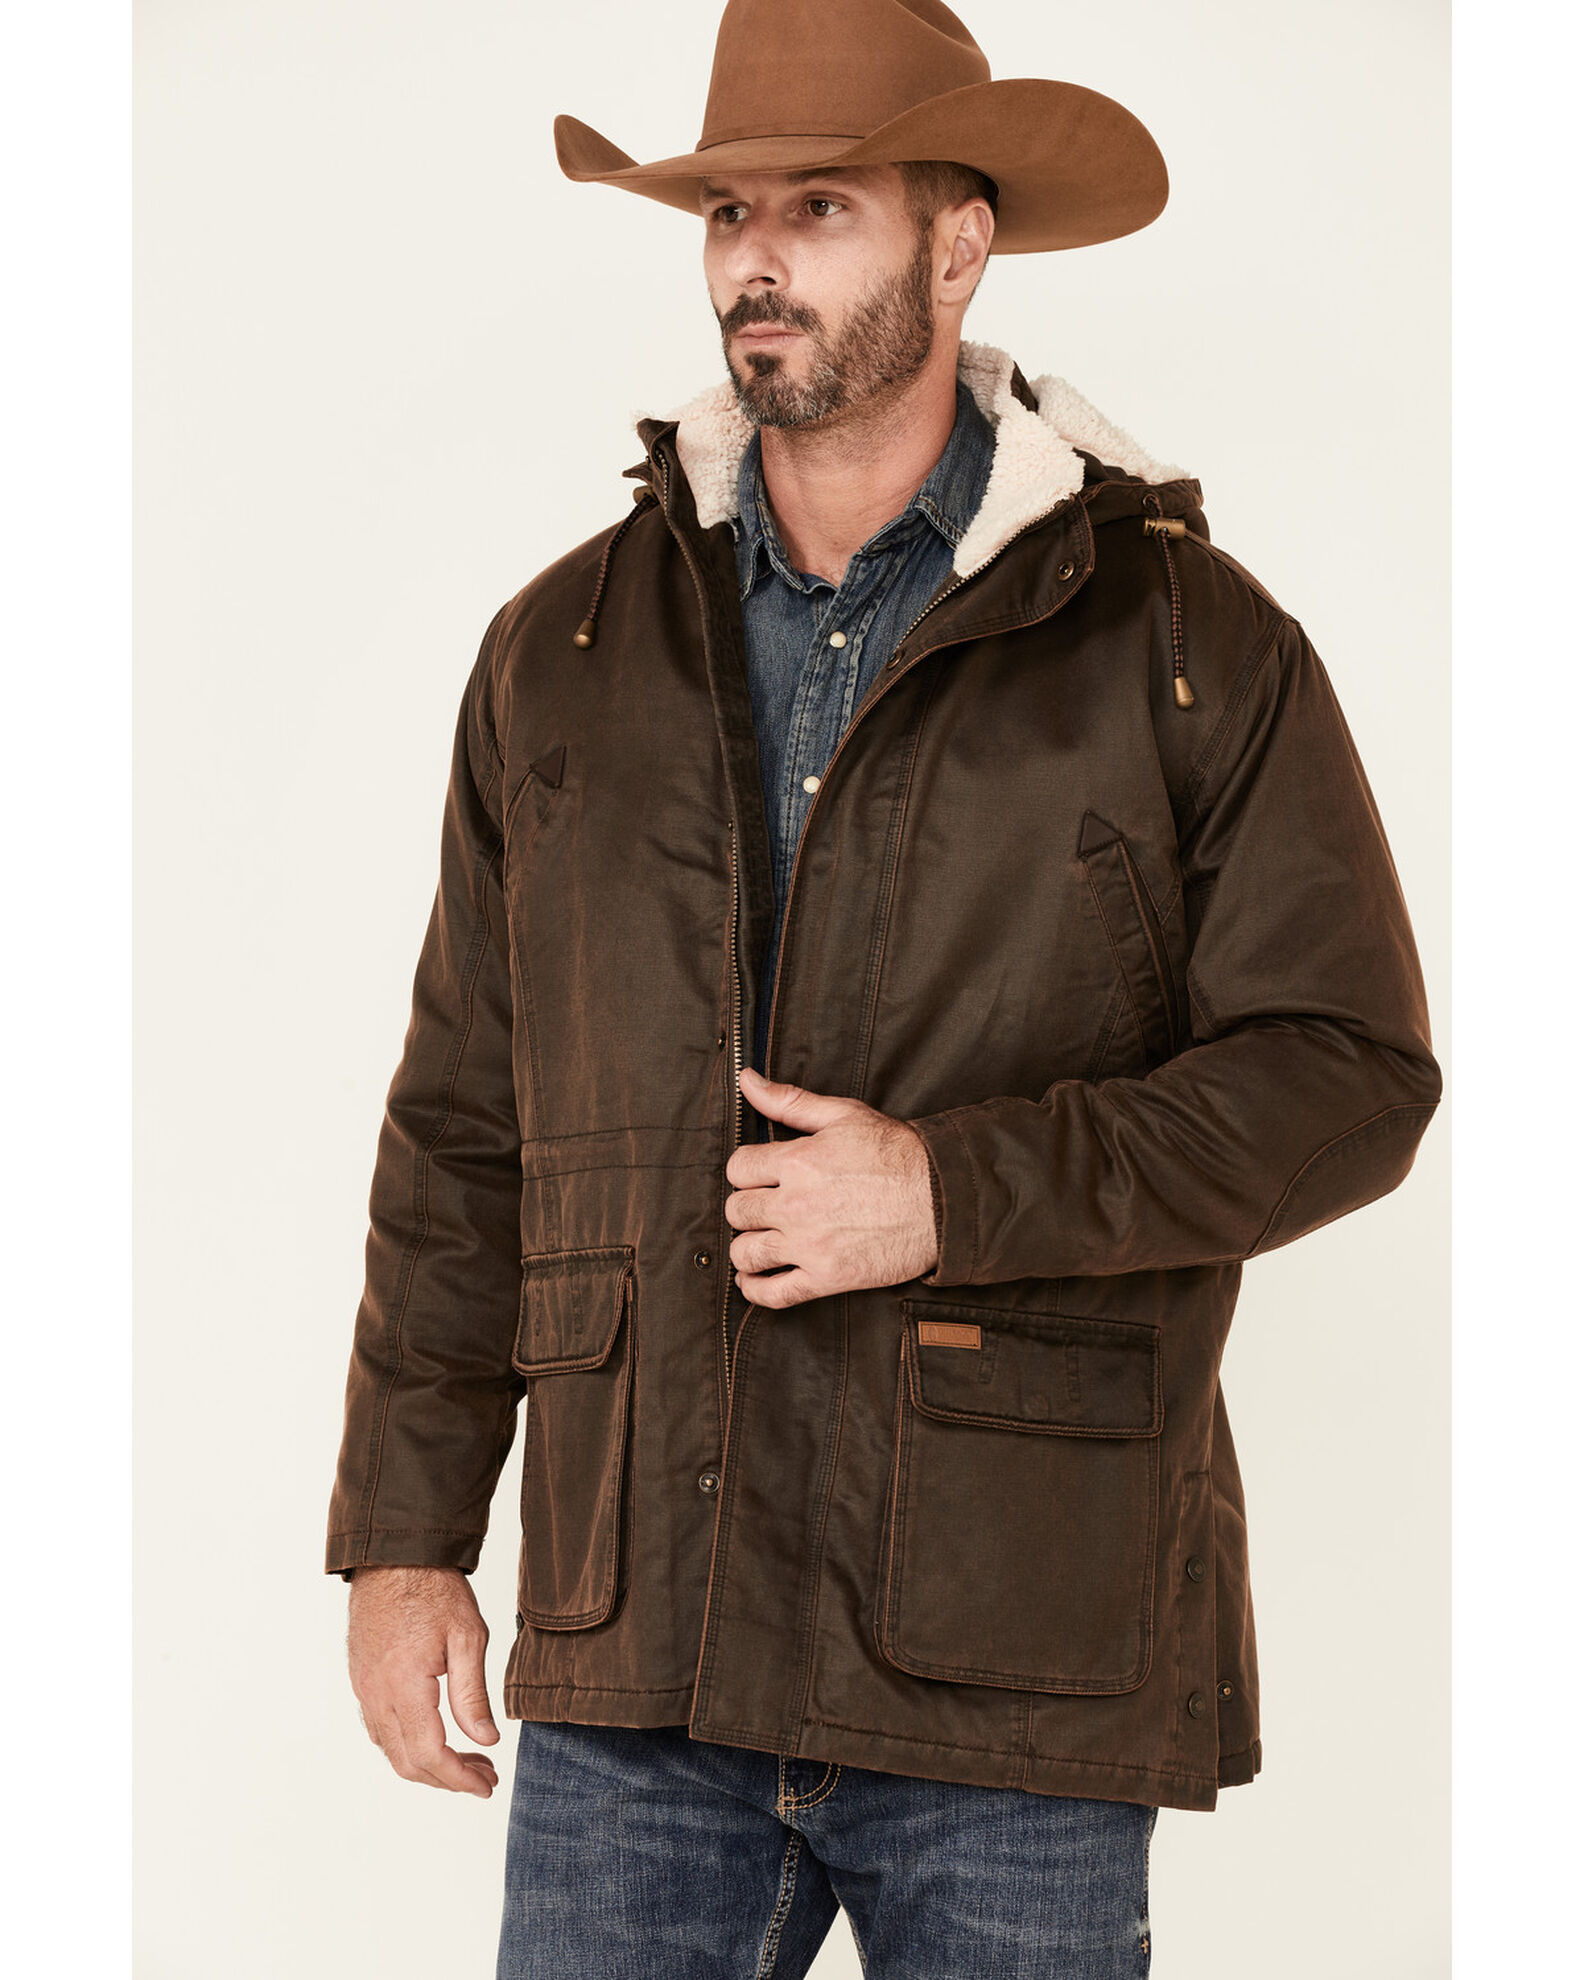 Product Name: Outback Trading Co. Men's Nolan Storm-Flap Jacket